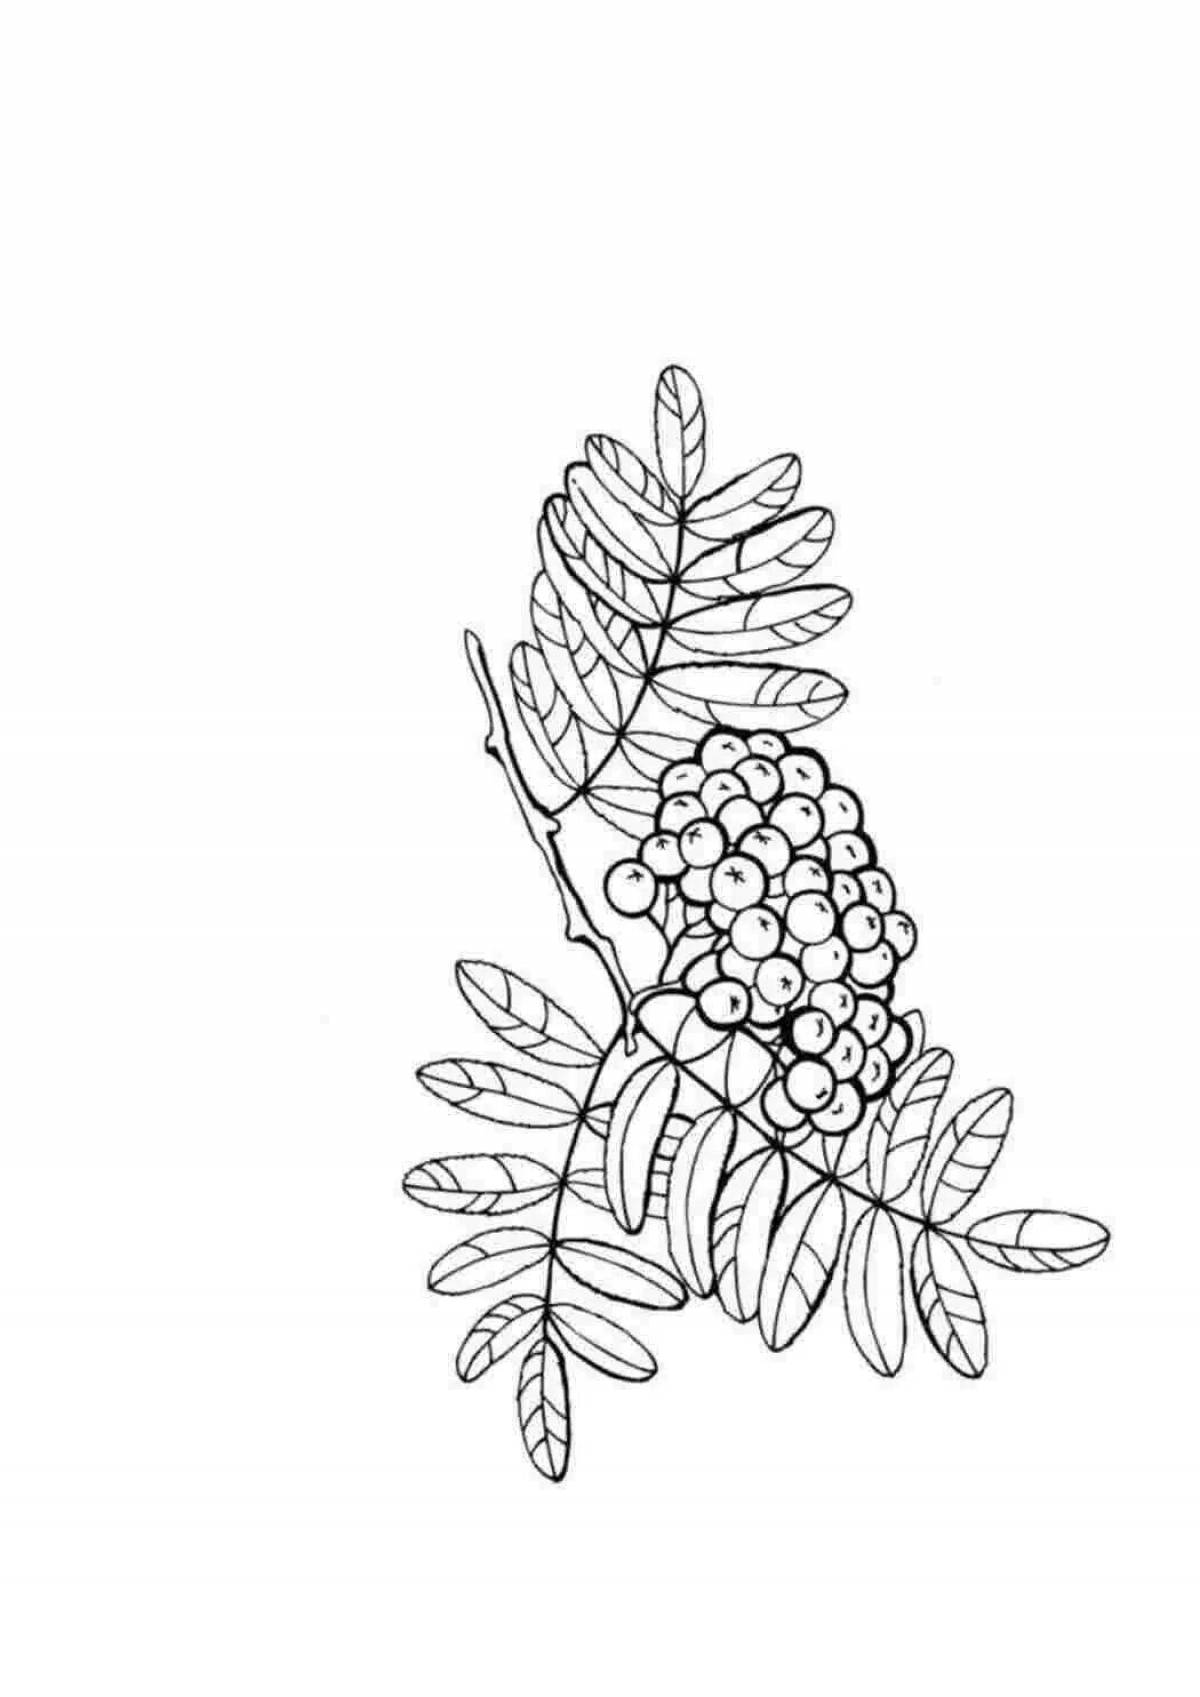 Coloring book glowing rowan branch for children